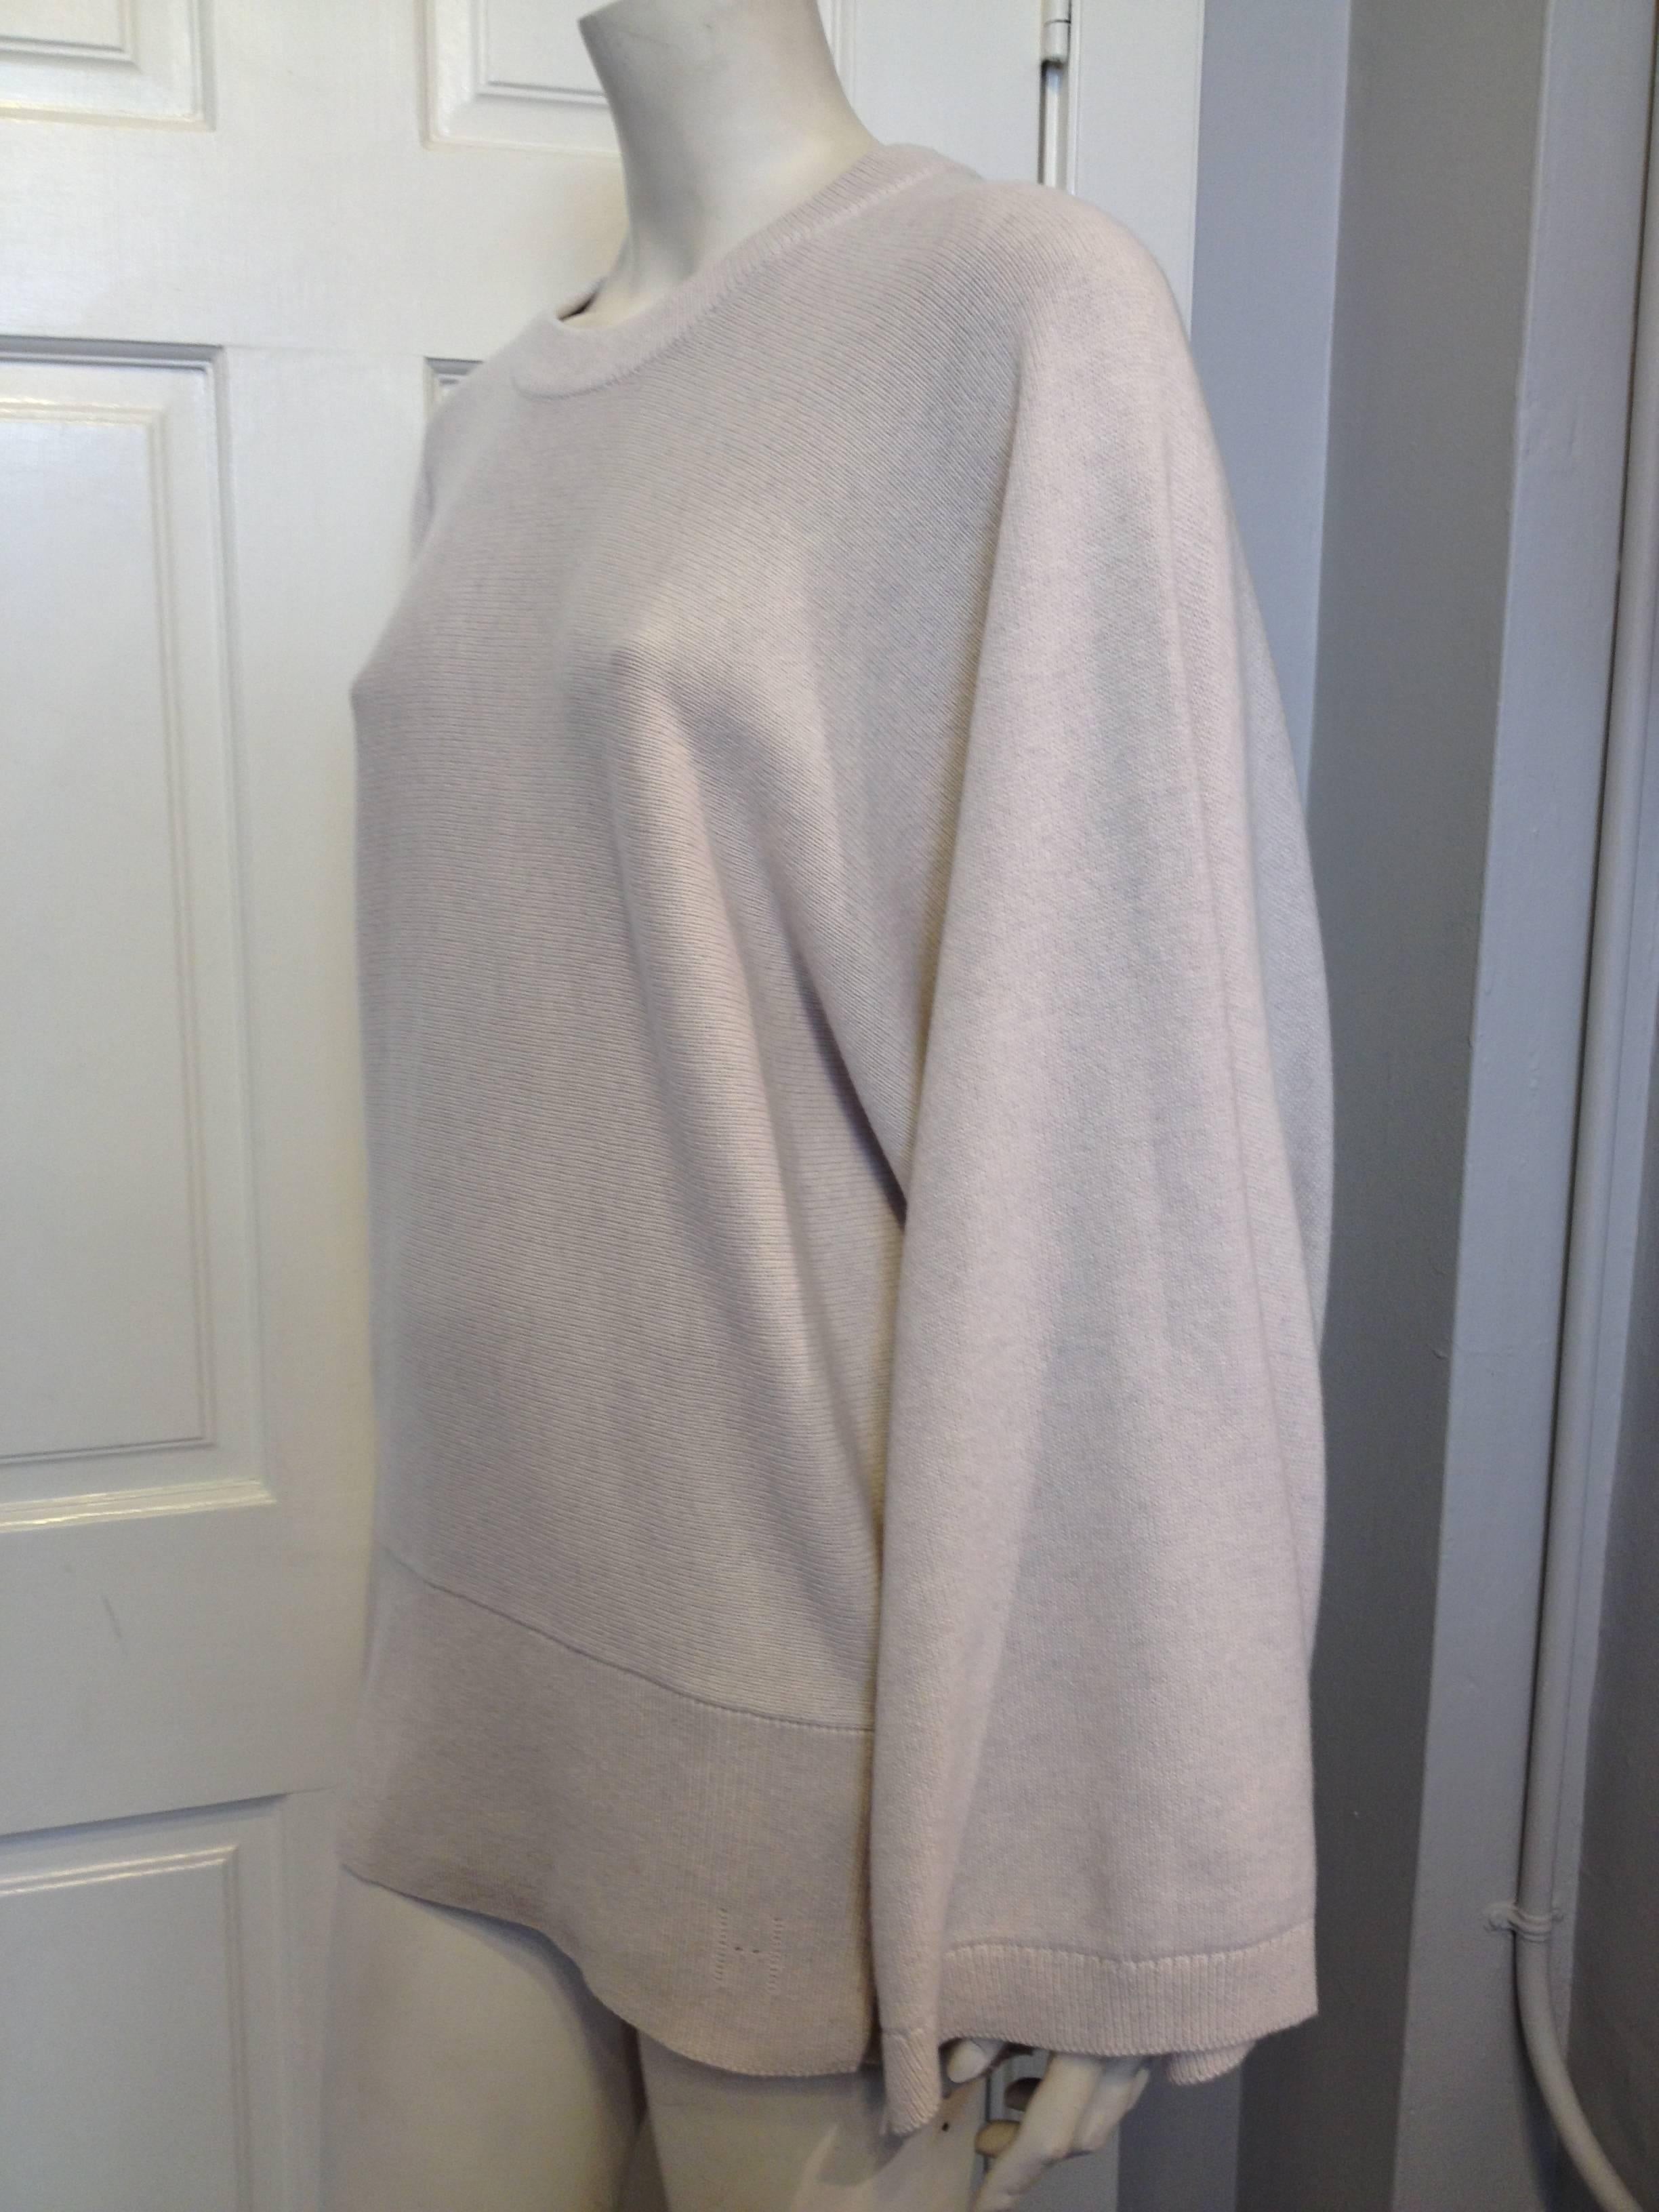 This sweater is the epitome of luxury! The cashmere is ultra soft and plushy, and the cut is beautiful - it's perfectly tailored but loose at the same time, with wide batwing sleeves and a slimmer waist. It is just the perfect shape for anything